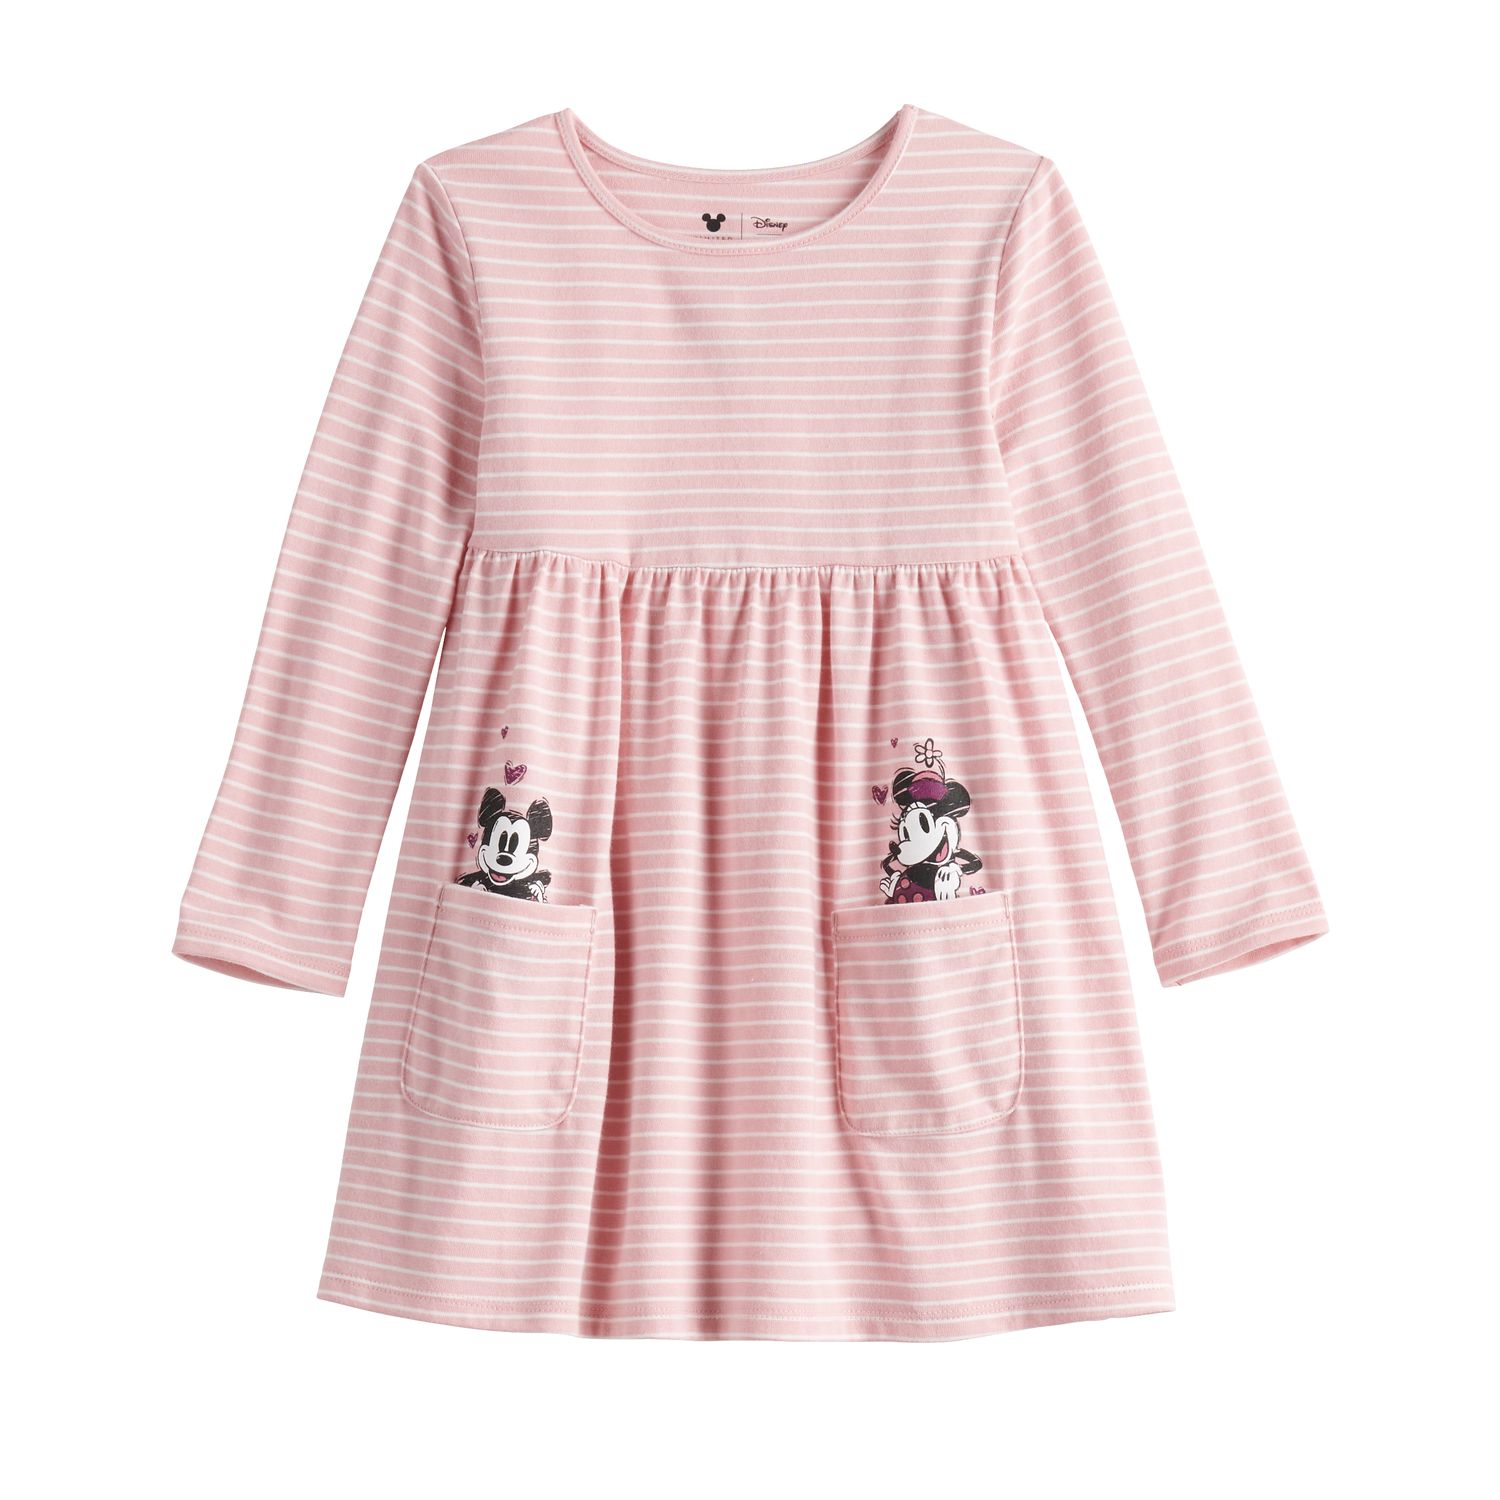 Image for Disney/Jumping Beans Disney's Minnie Mouse & Mickey Mouse Toddler Girl Pink Striped Knit Dress by Jumping Beans® at Kohl's.